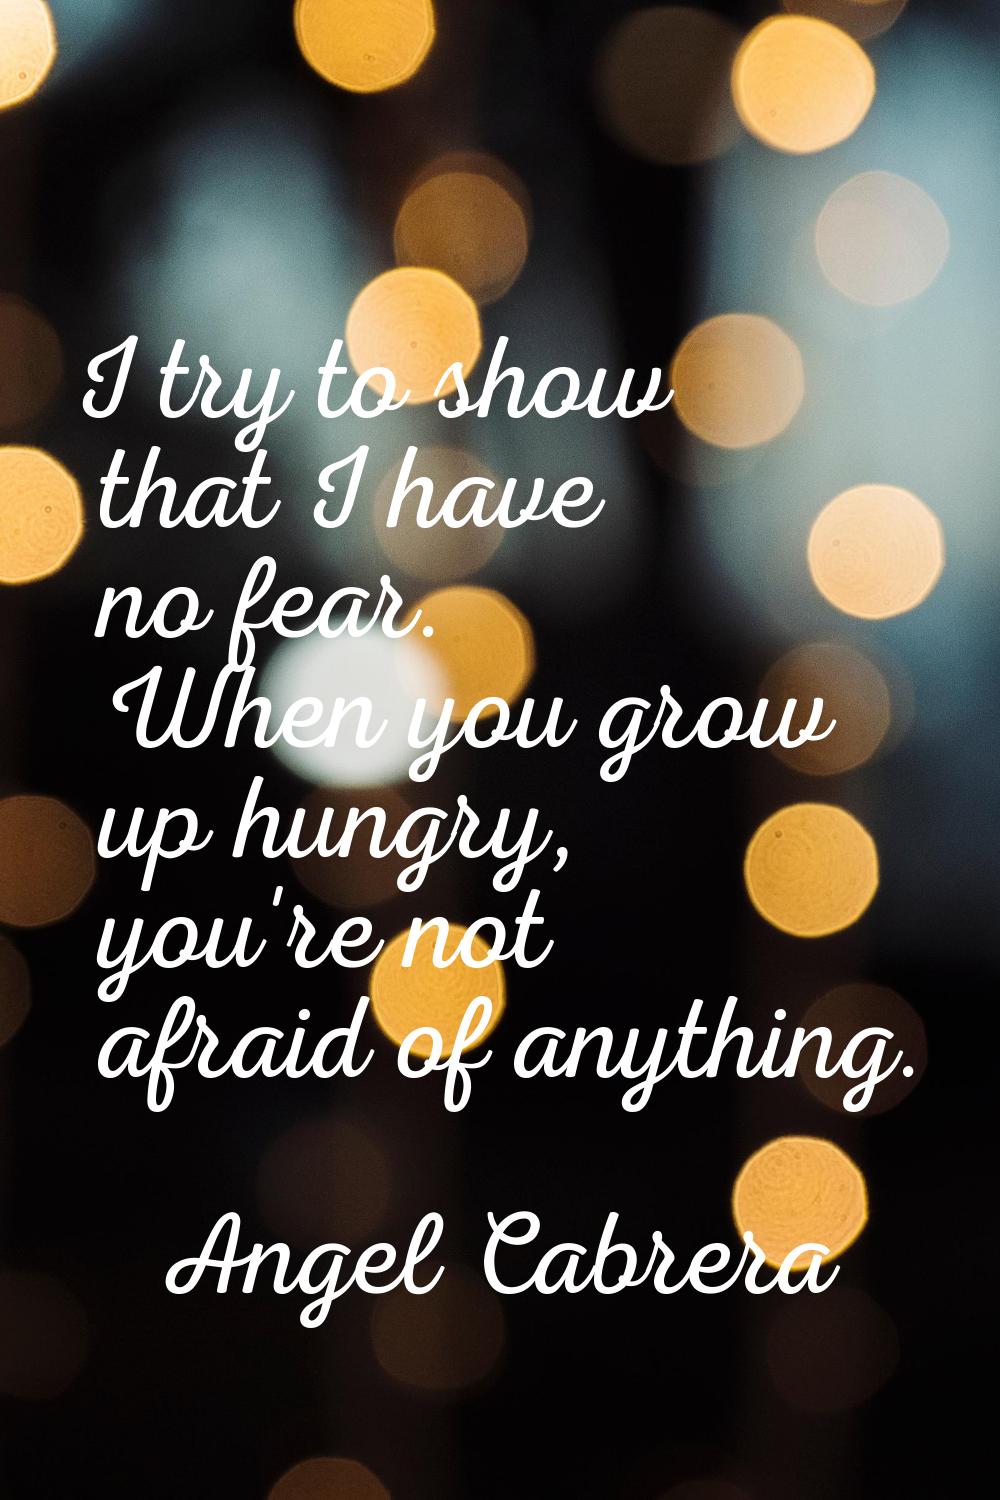 I try to show that I have no fear. When you grow up hungry, you're not afraid of anything.